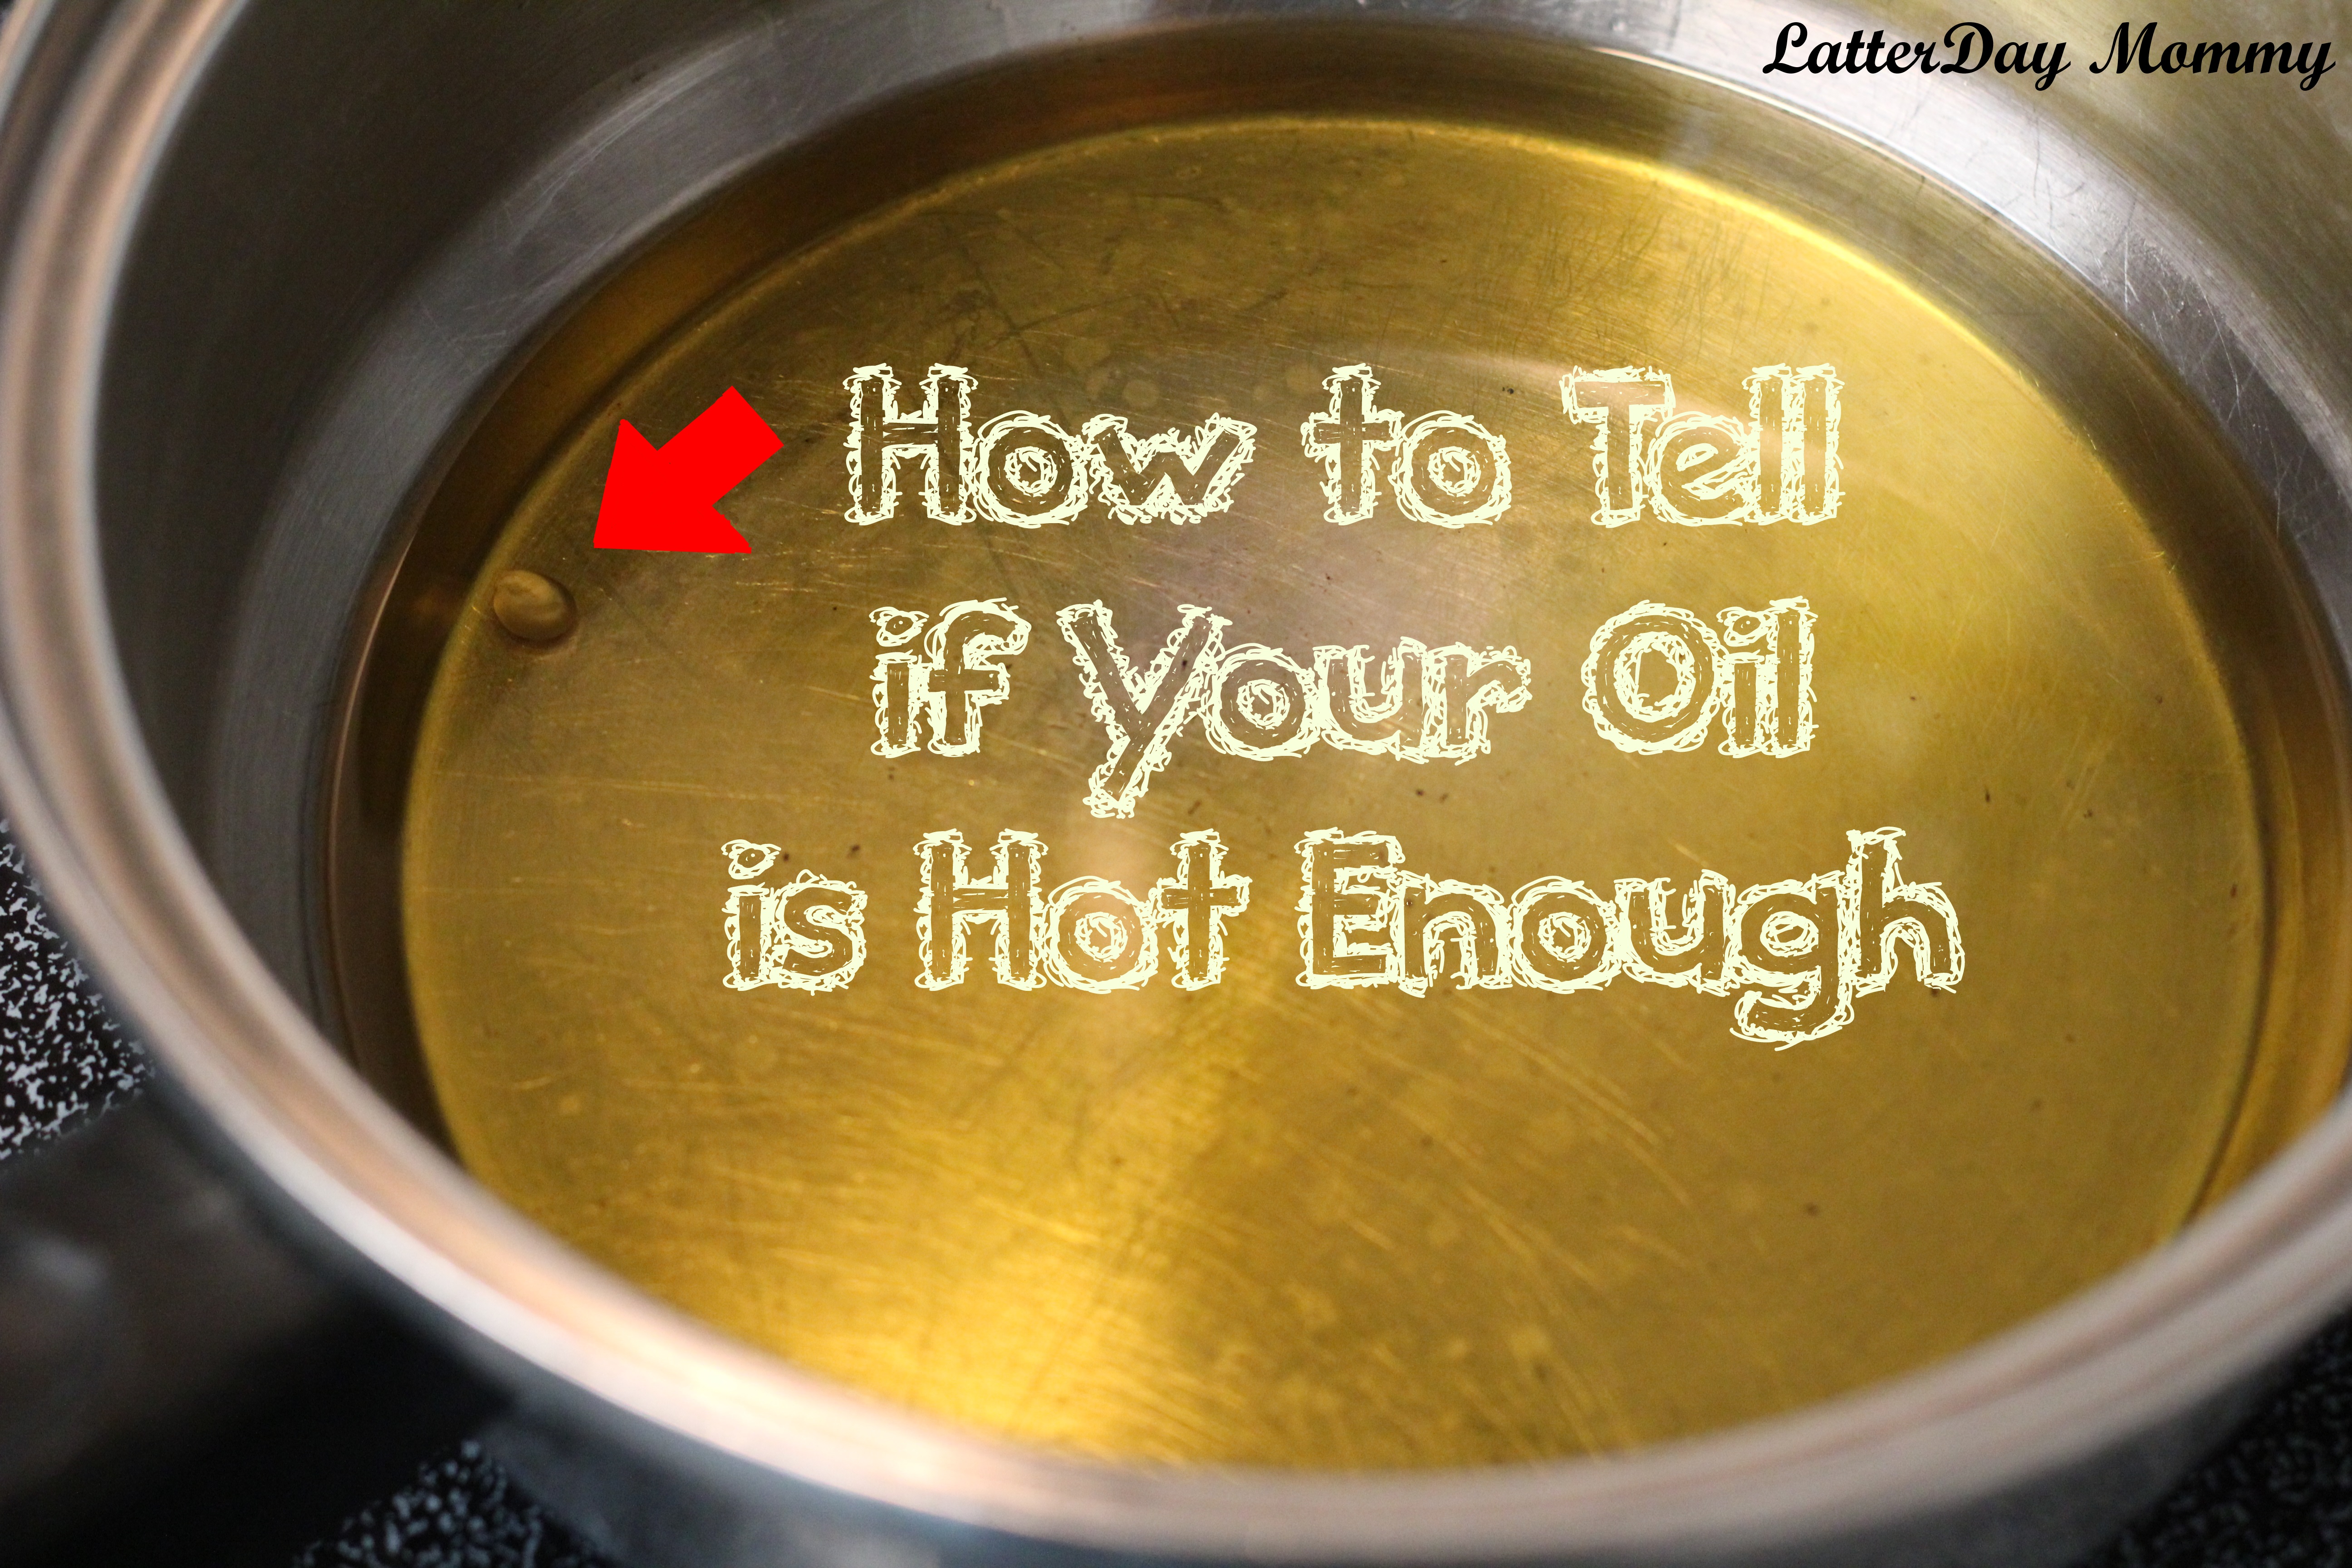 KUOW - How do you know if your oil is hot enough to deep fry? Use your ears